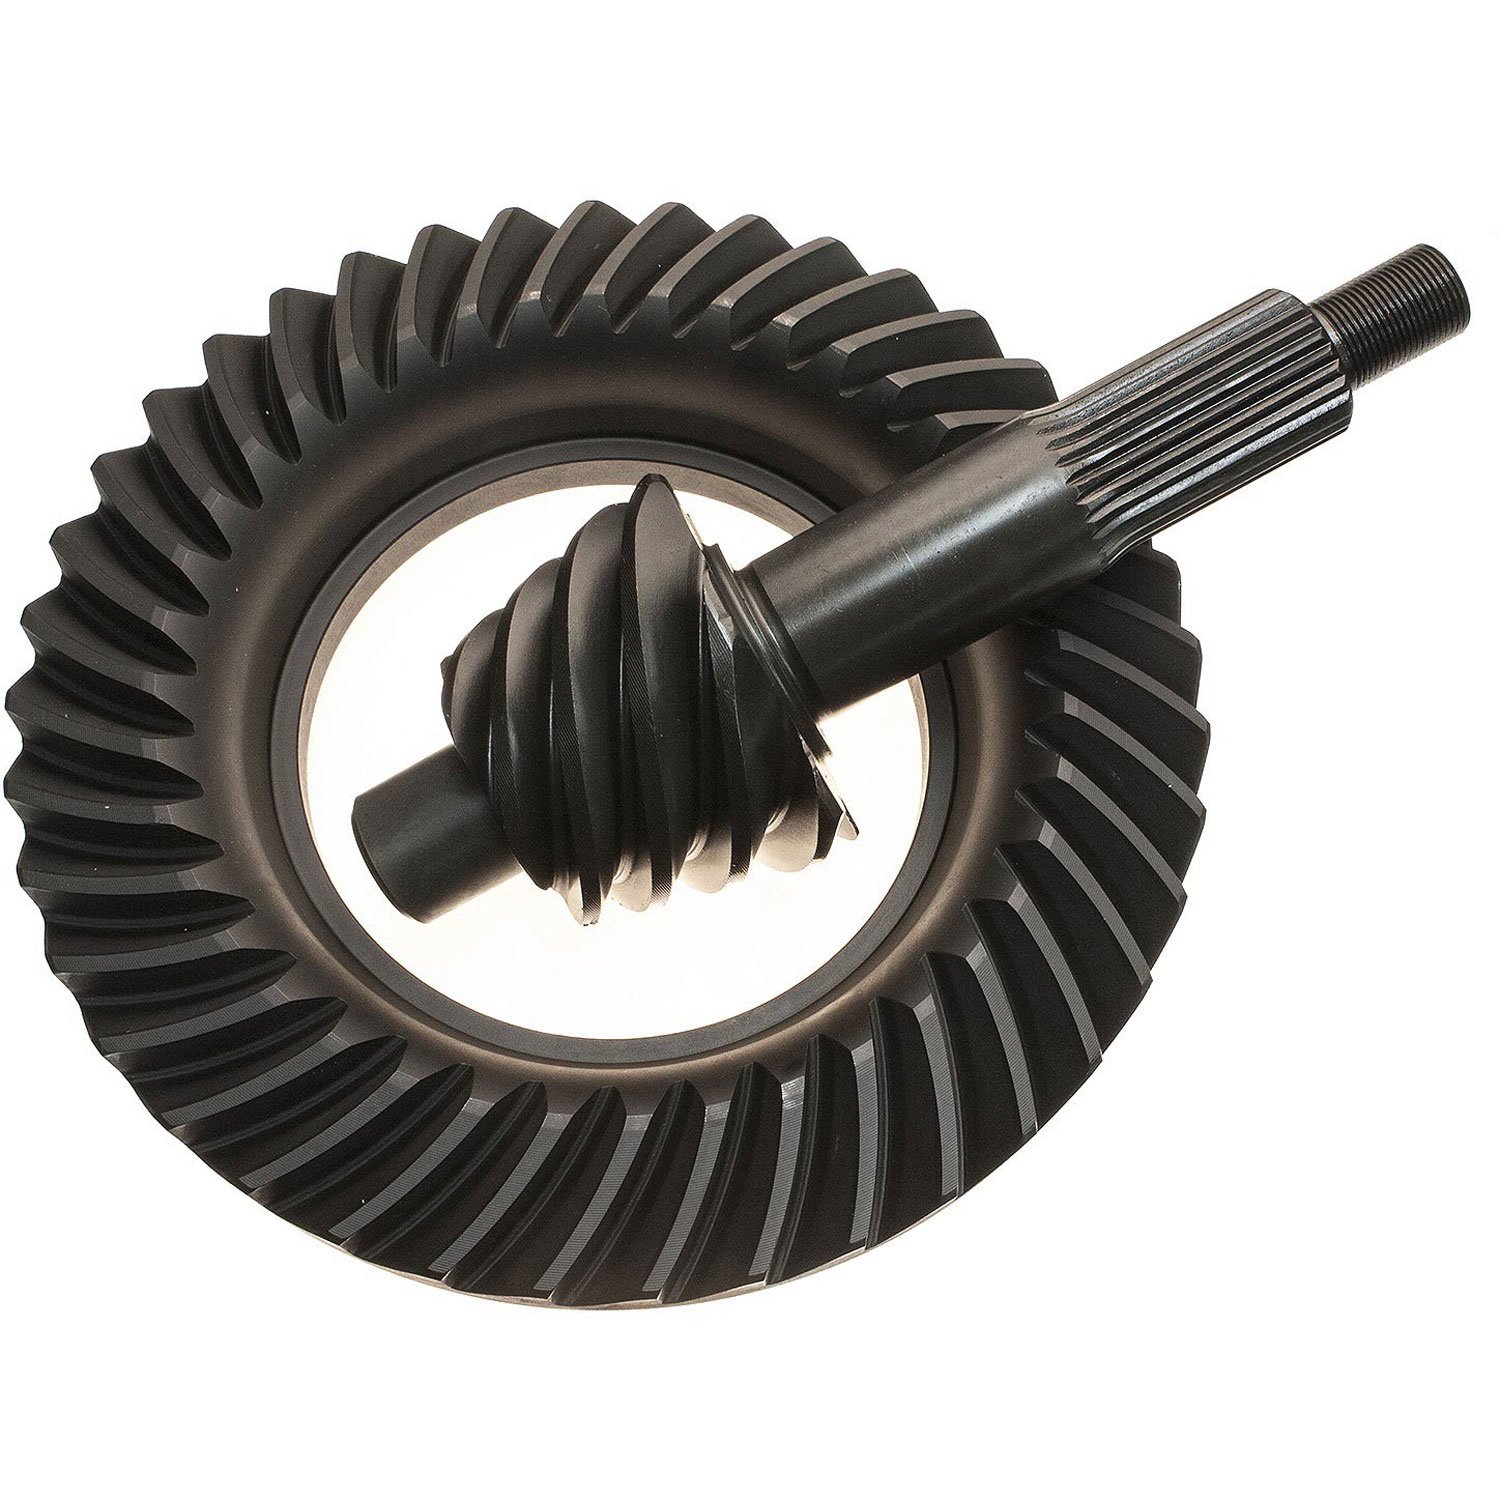 Ford 9" Pro Ring & Pinion Gear Set Ratio: 6.00